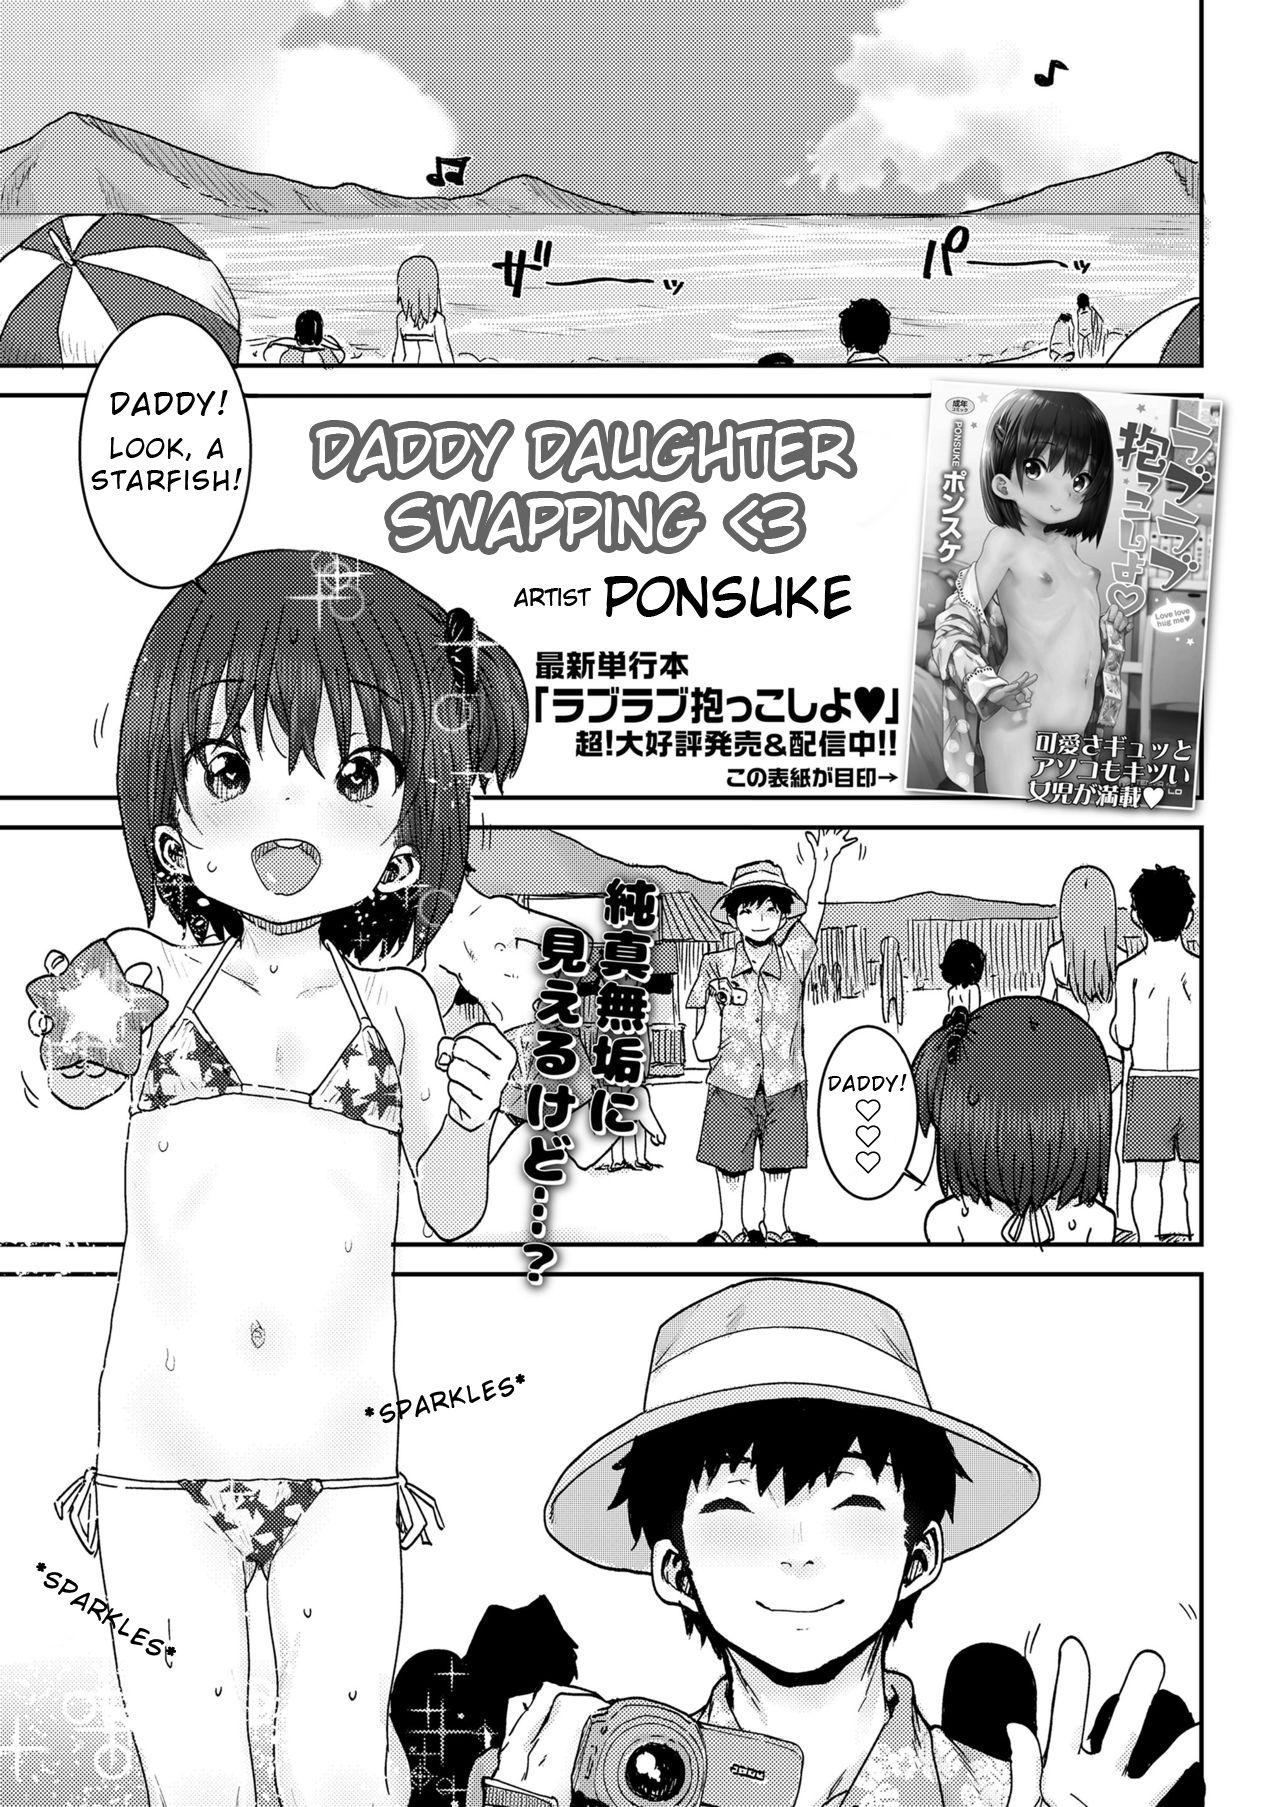 Oyako Swapping | Daddy Daughter Swapping 1